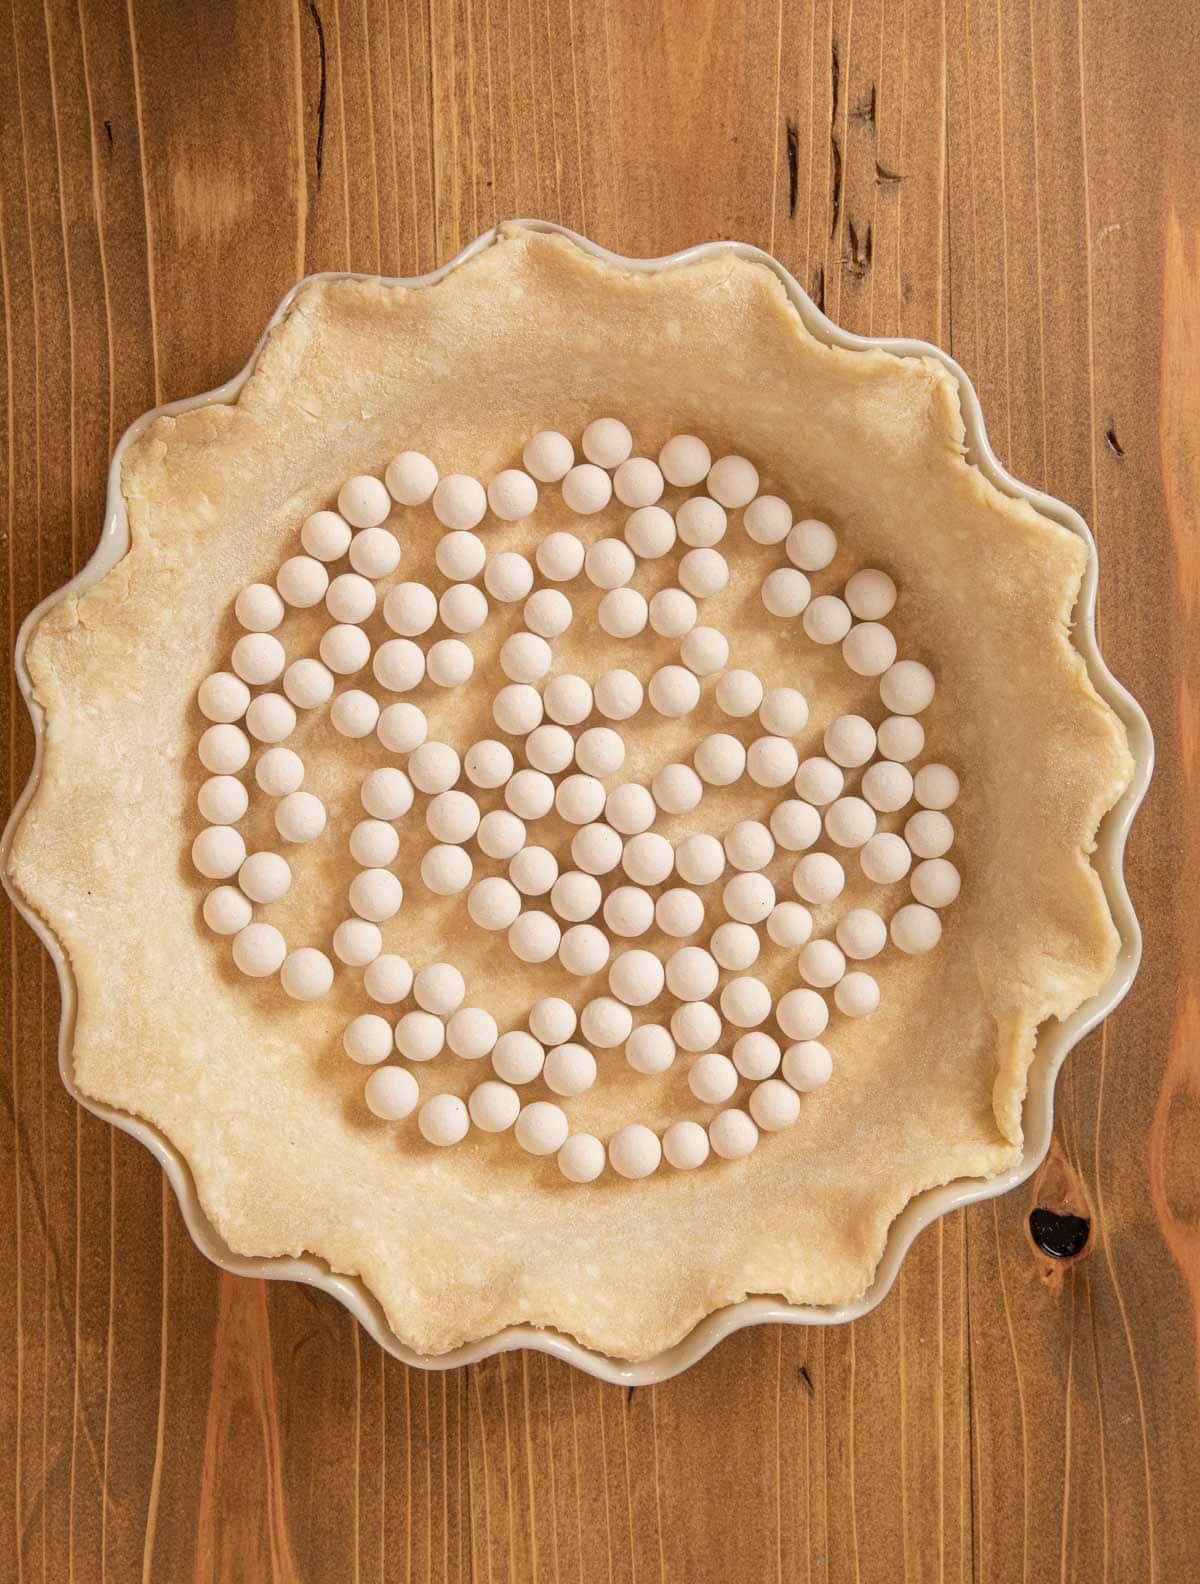 Pie Crust unbaked crust with pie weights on pie plate